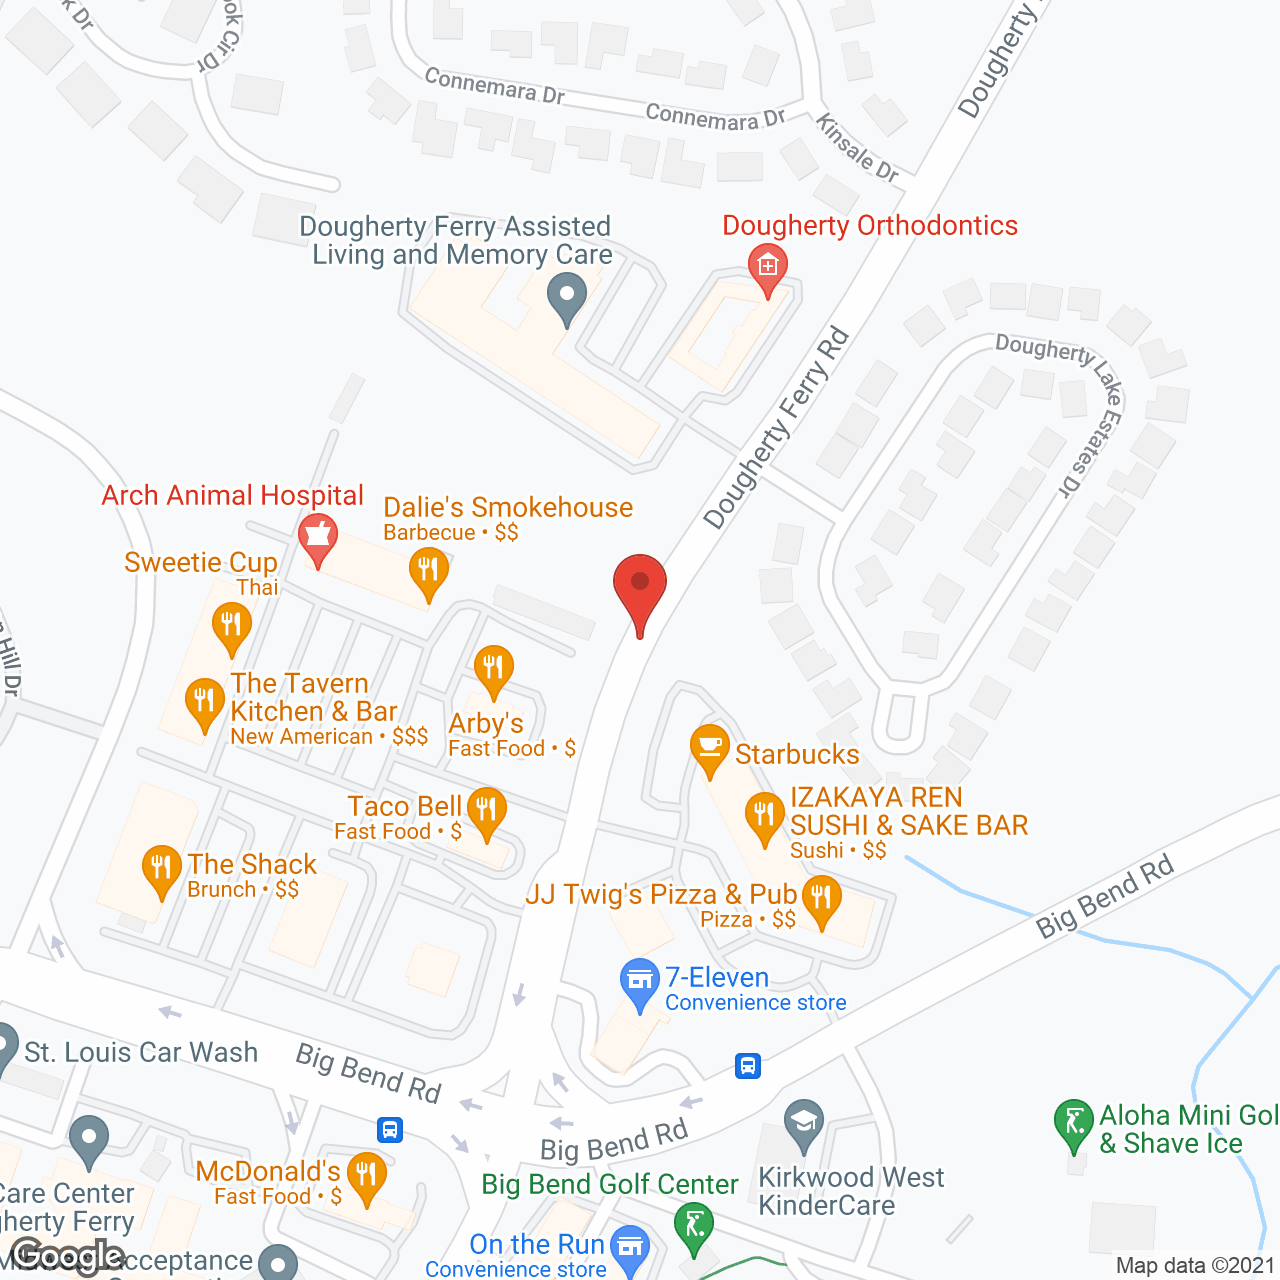 Dougherty Ferry Assisted Living and Memory Care in google map